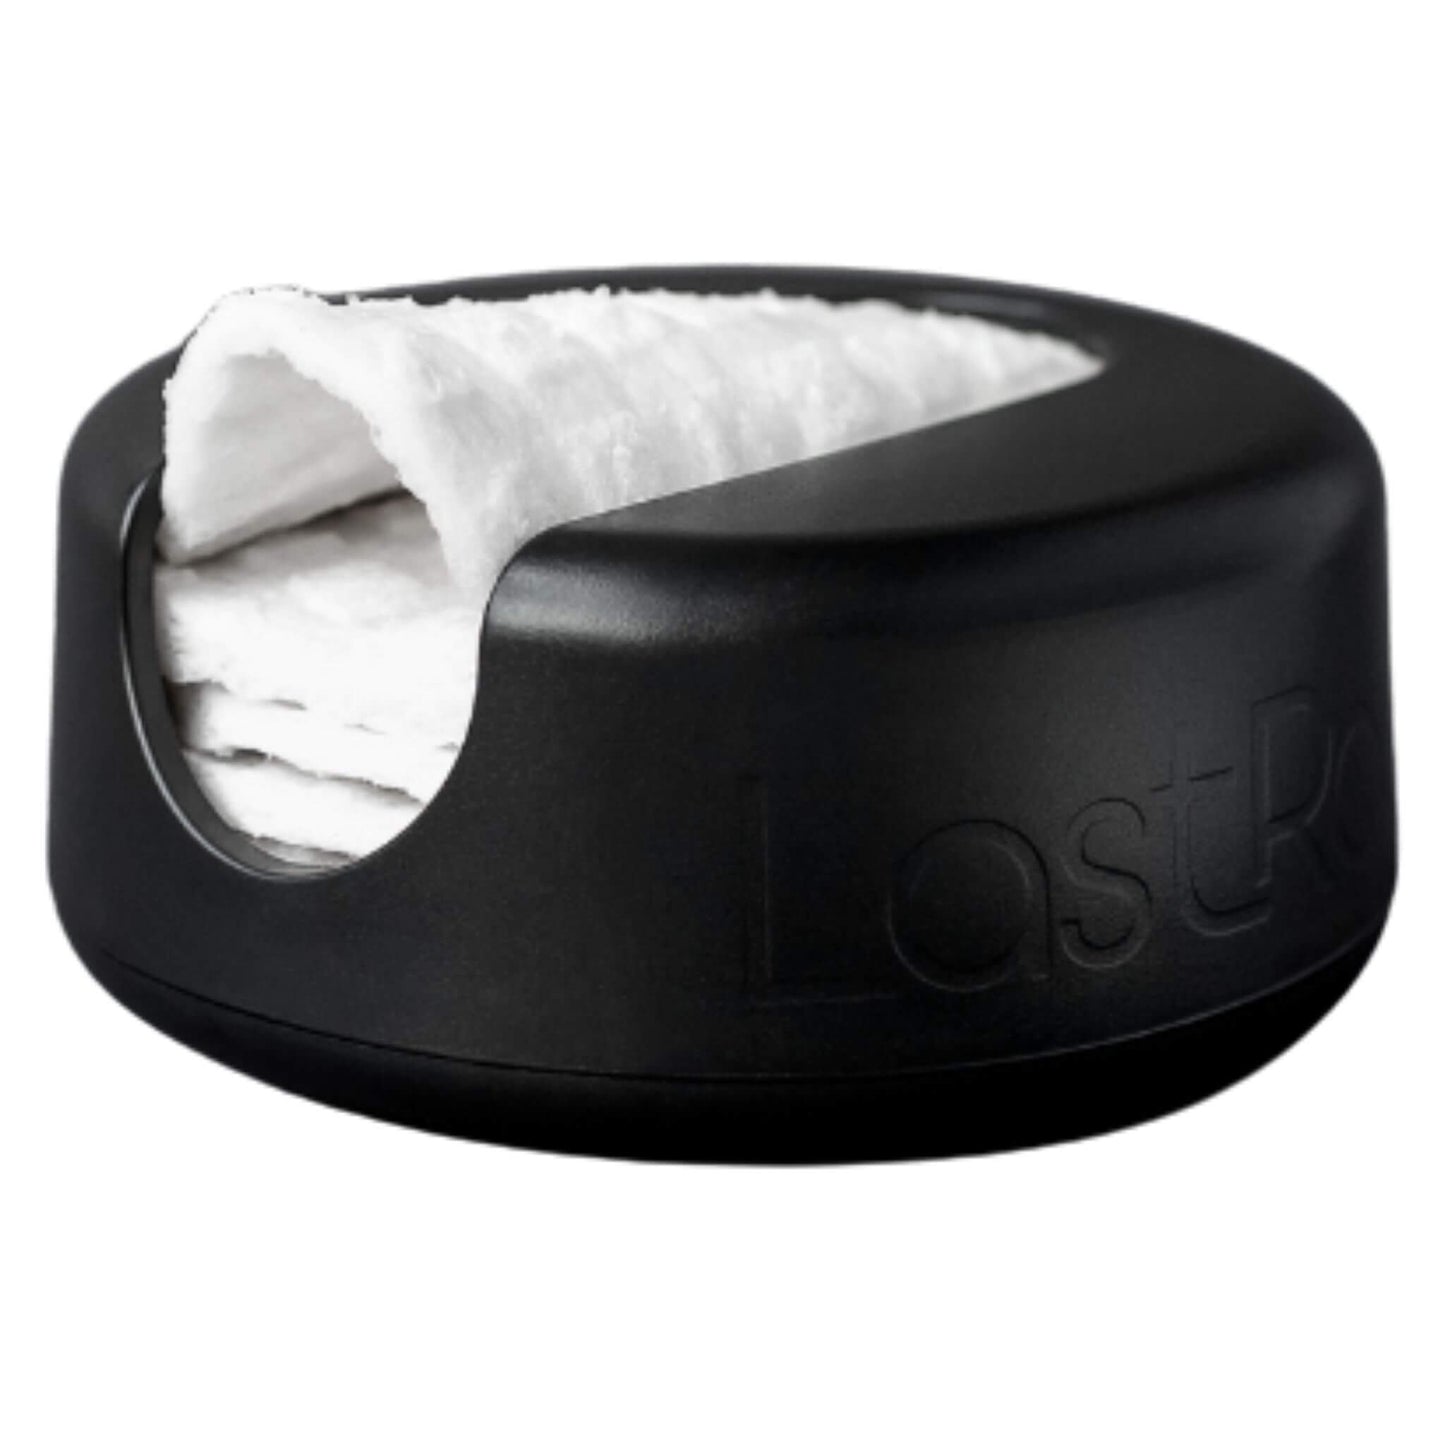 LastObject LastRounds black in colour, 7 rounds in each case. Replacing single-use cotton makeup rounds